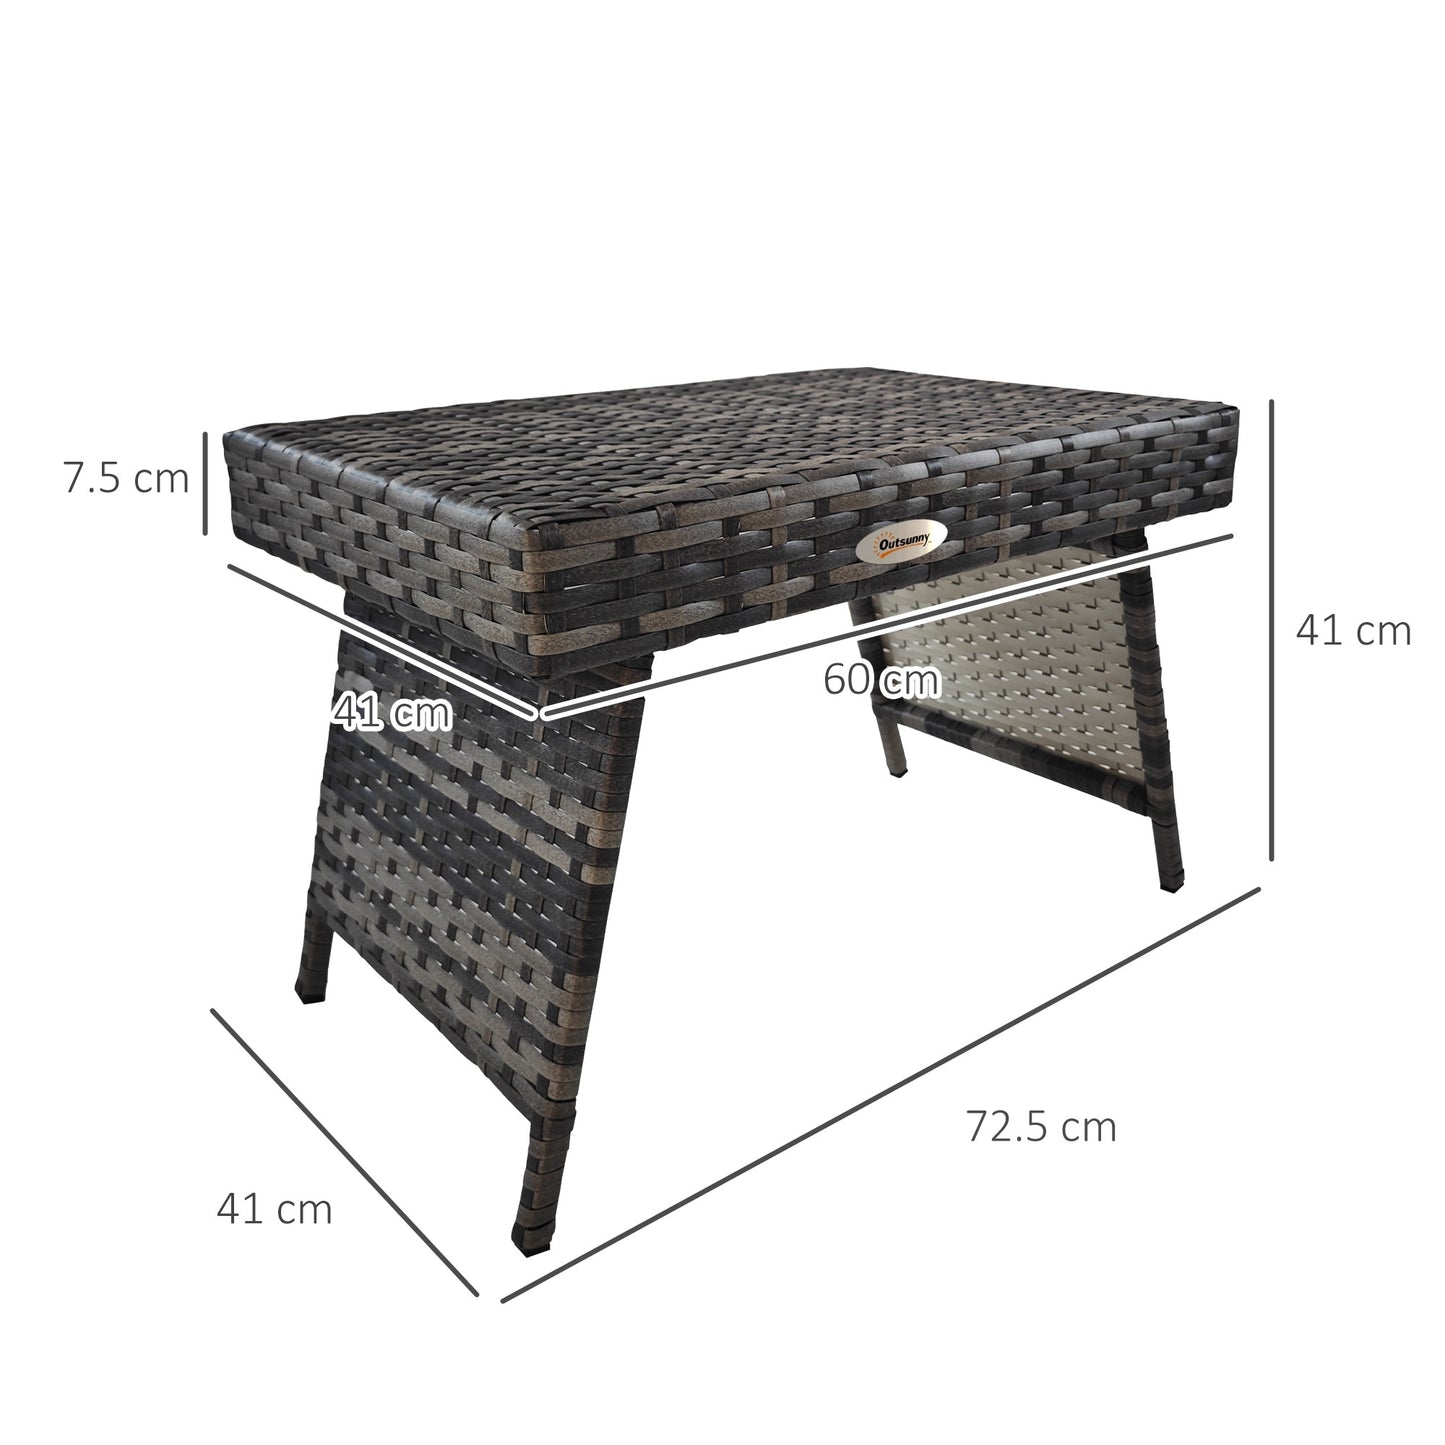 Outsunny Rattan Coffee Table, Foldable Metal Frame Side Table for Outdoor, Garden, Lawn, Mixed Grey